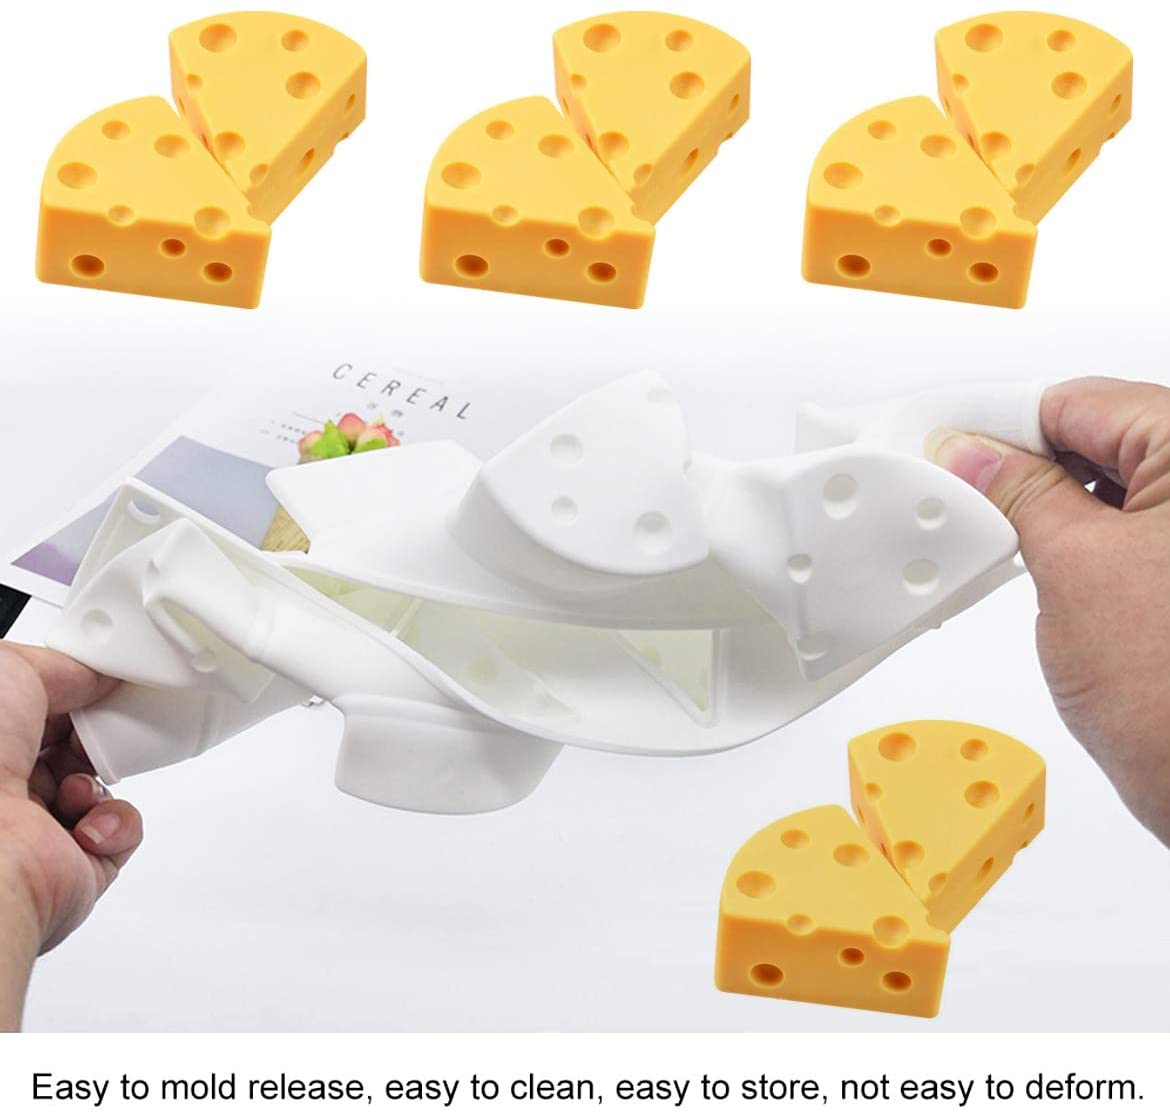 Advantages For The 3D Cheese Shape Silicone Mousse Mold